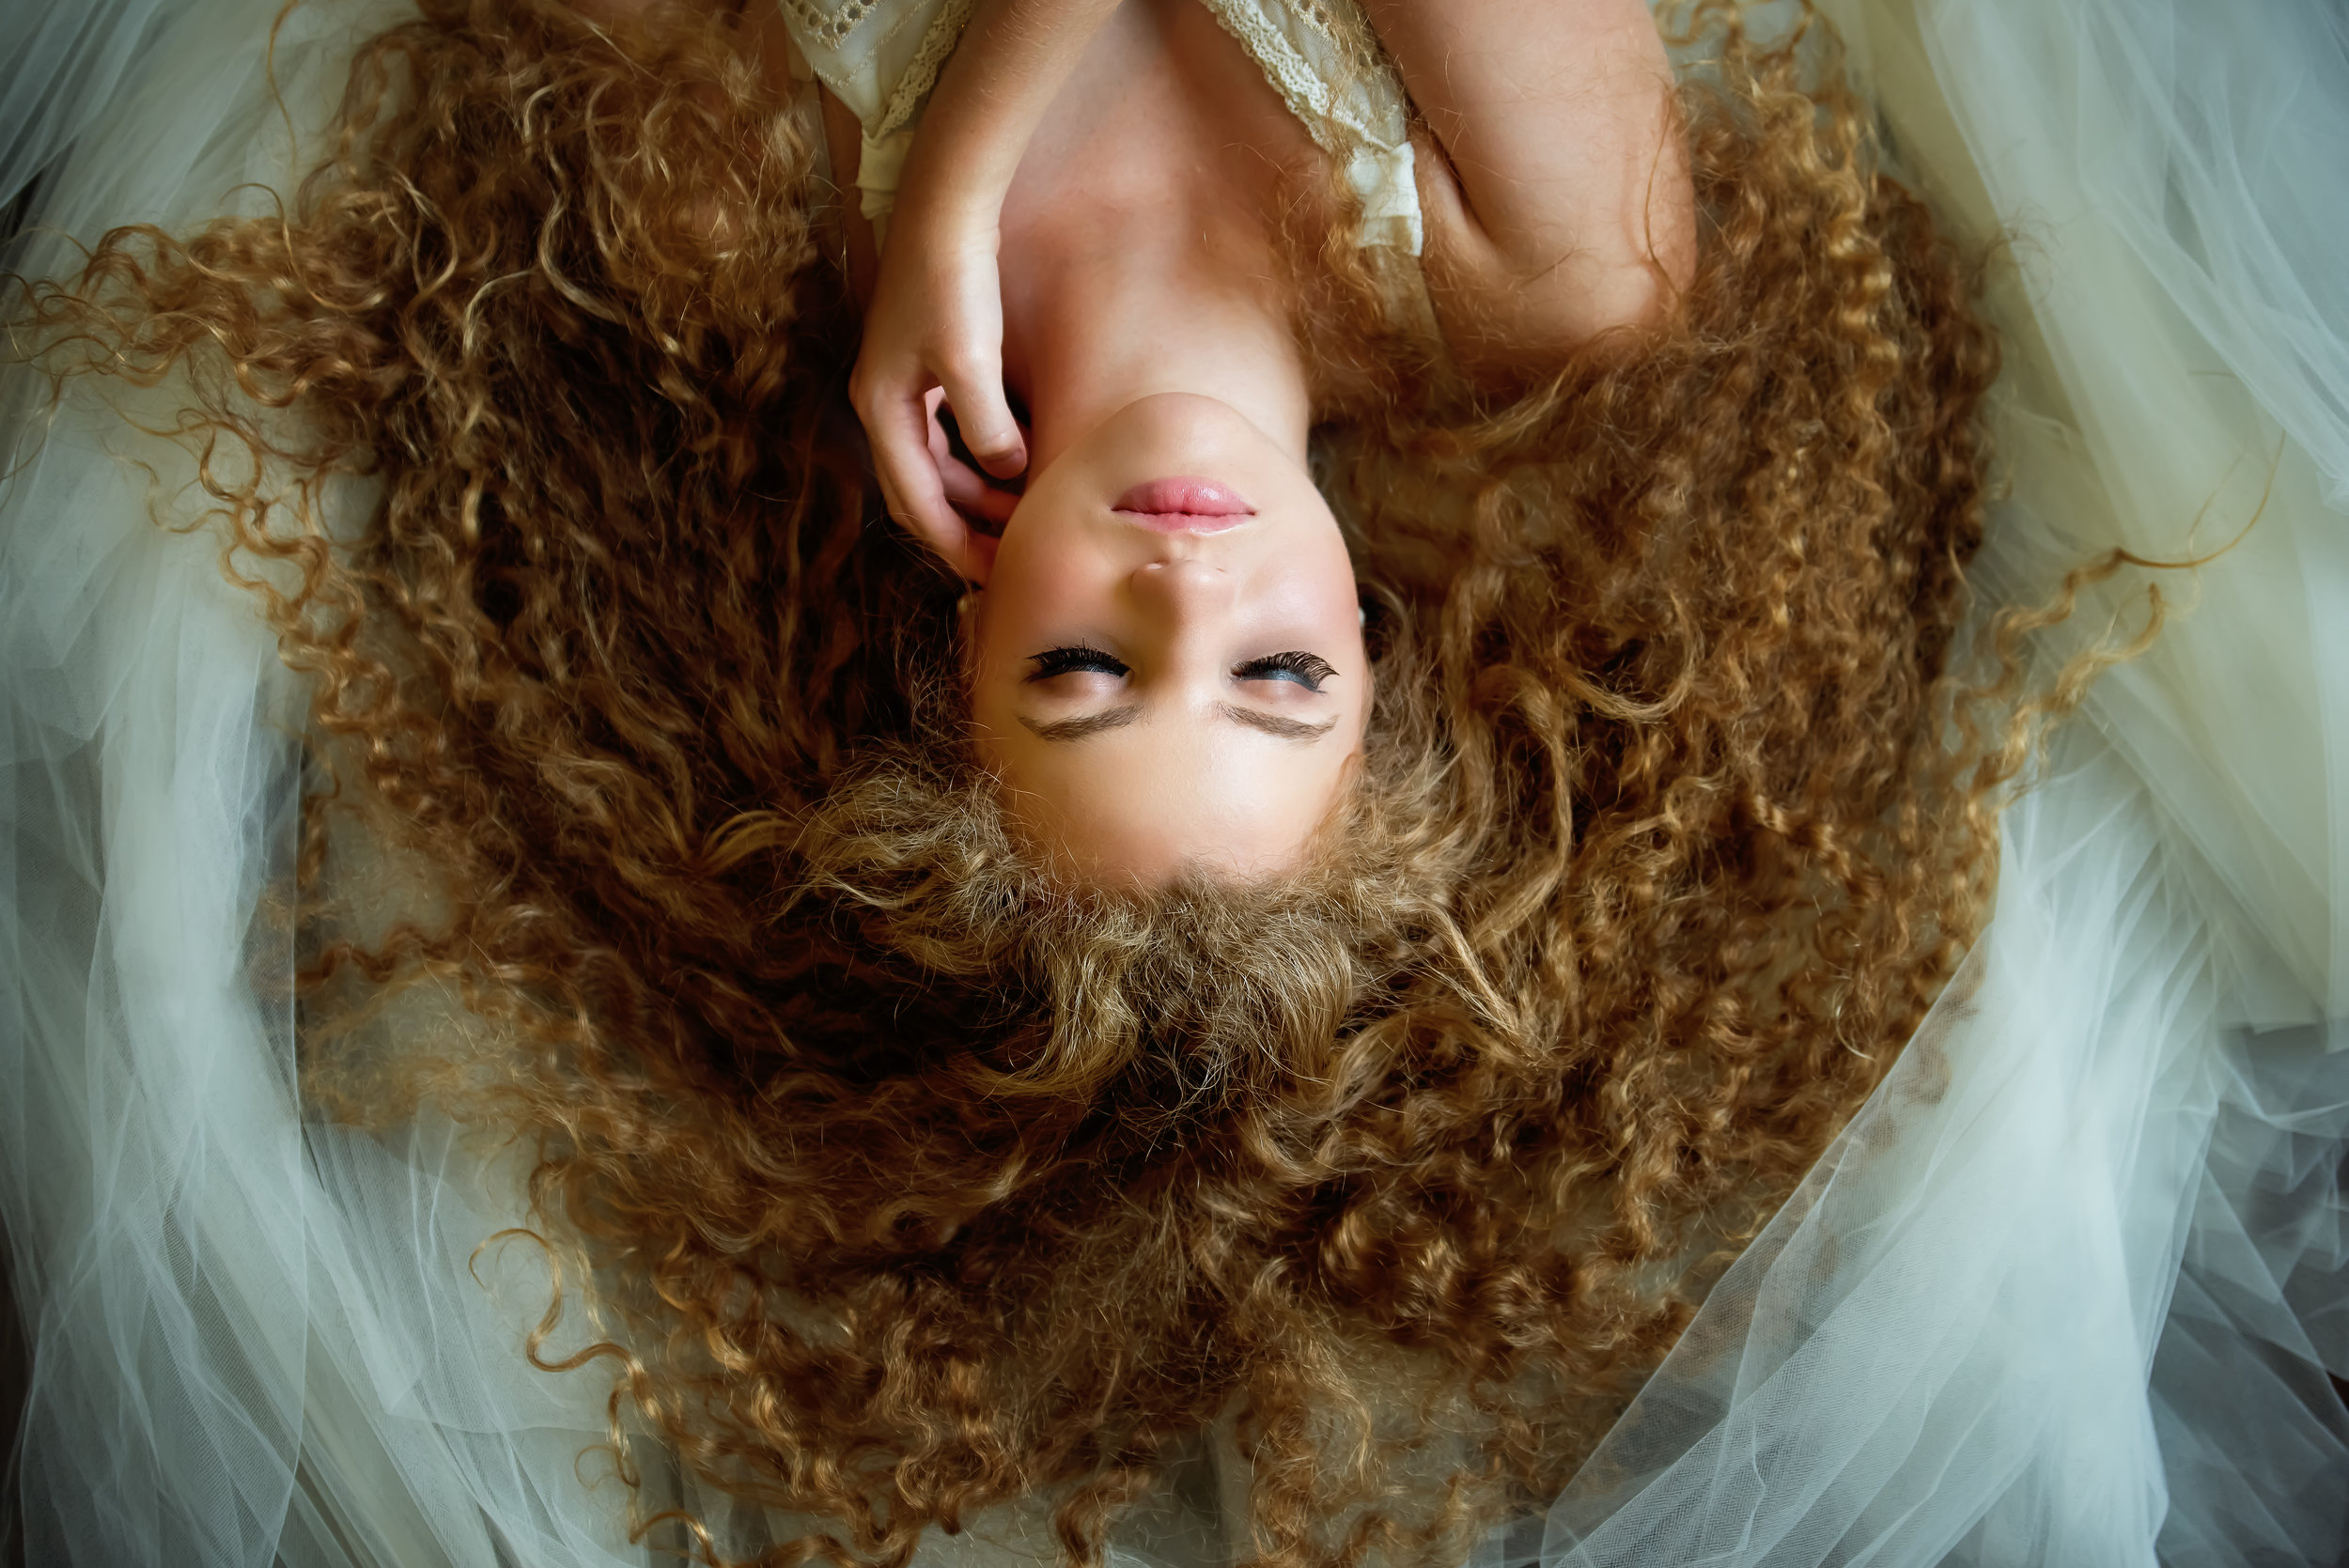  Headshot from above of a woman with curly hair lying on a white veil. Douglas County 